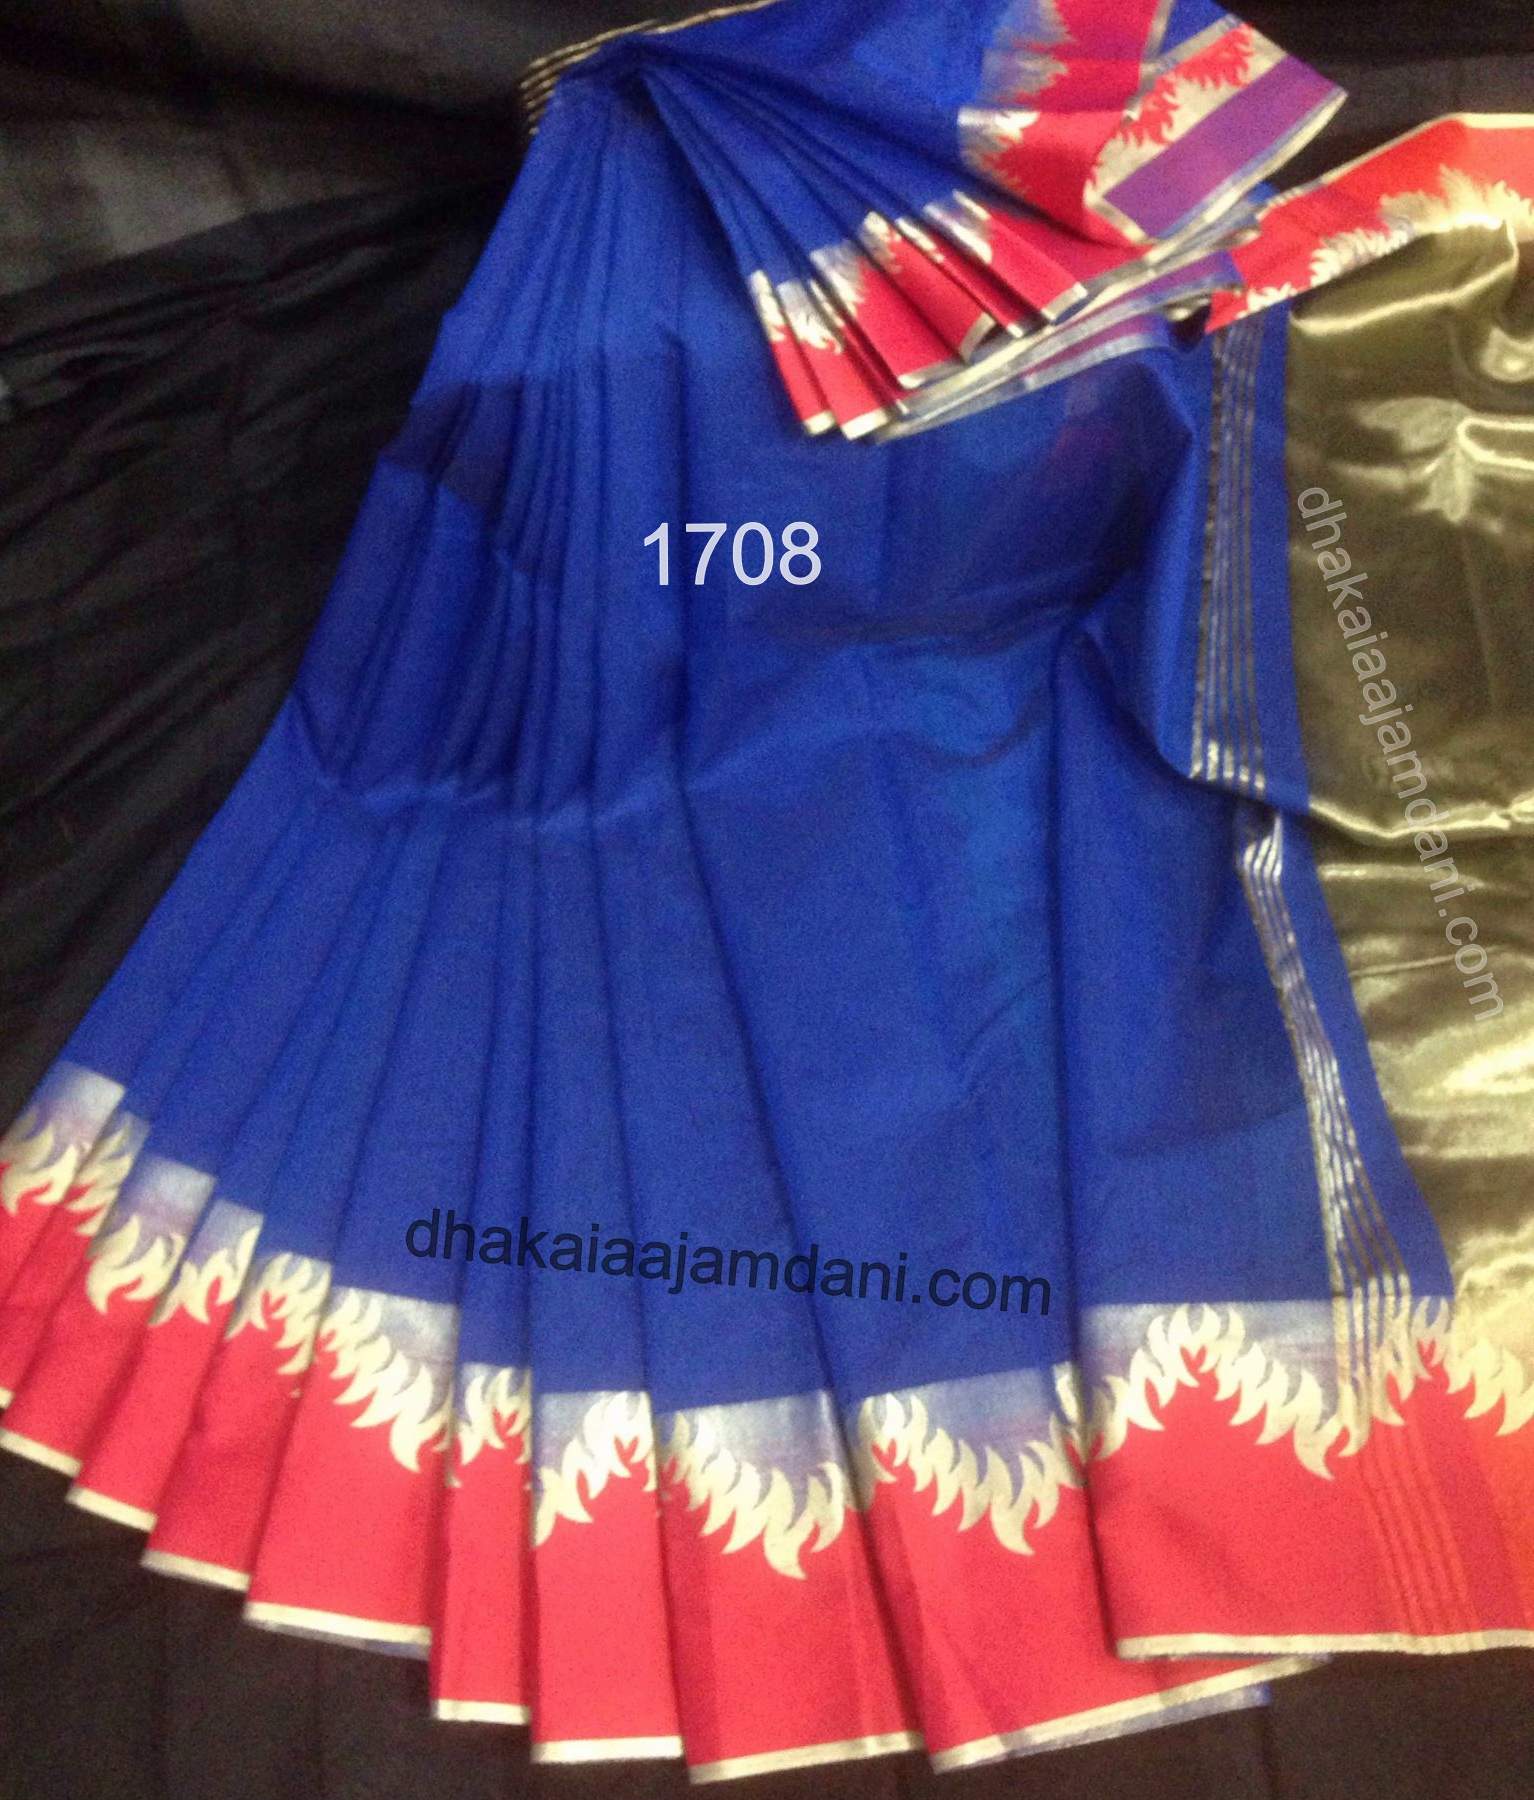 Code: 1708, Price: 1500tk
Delivery Charge: Free